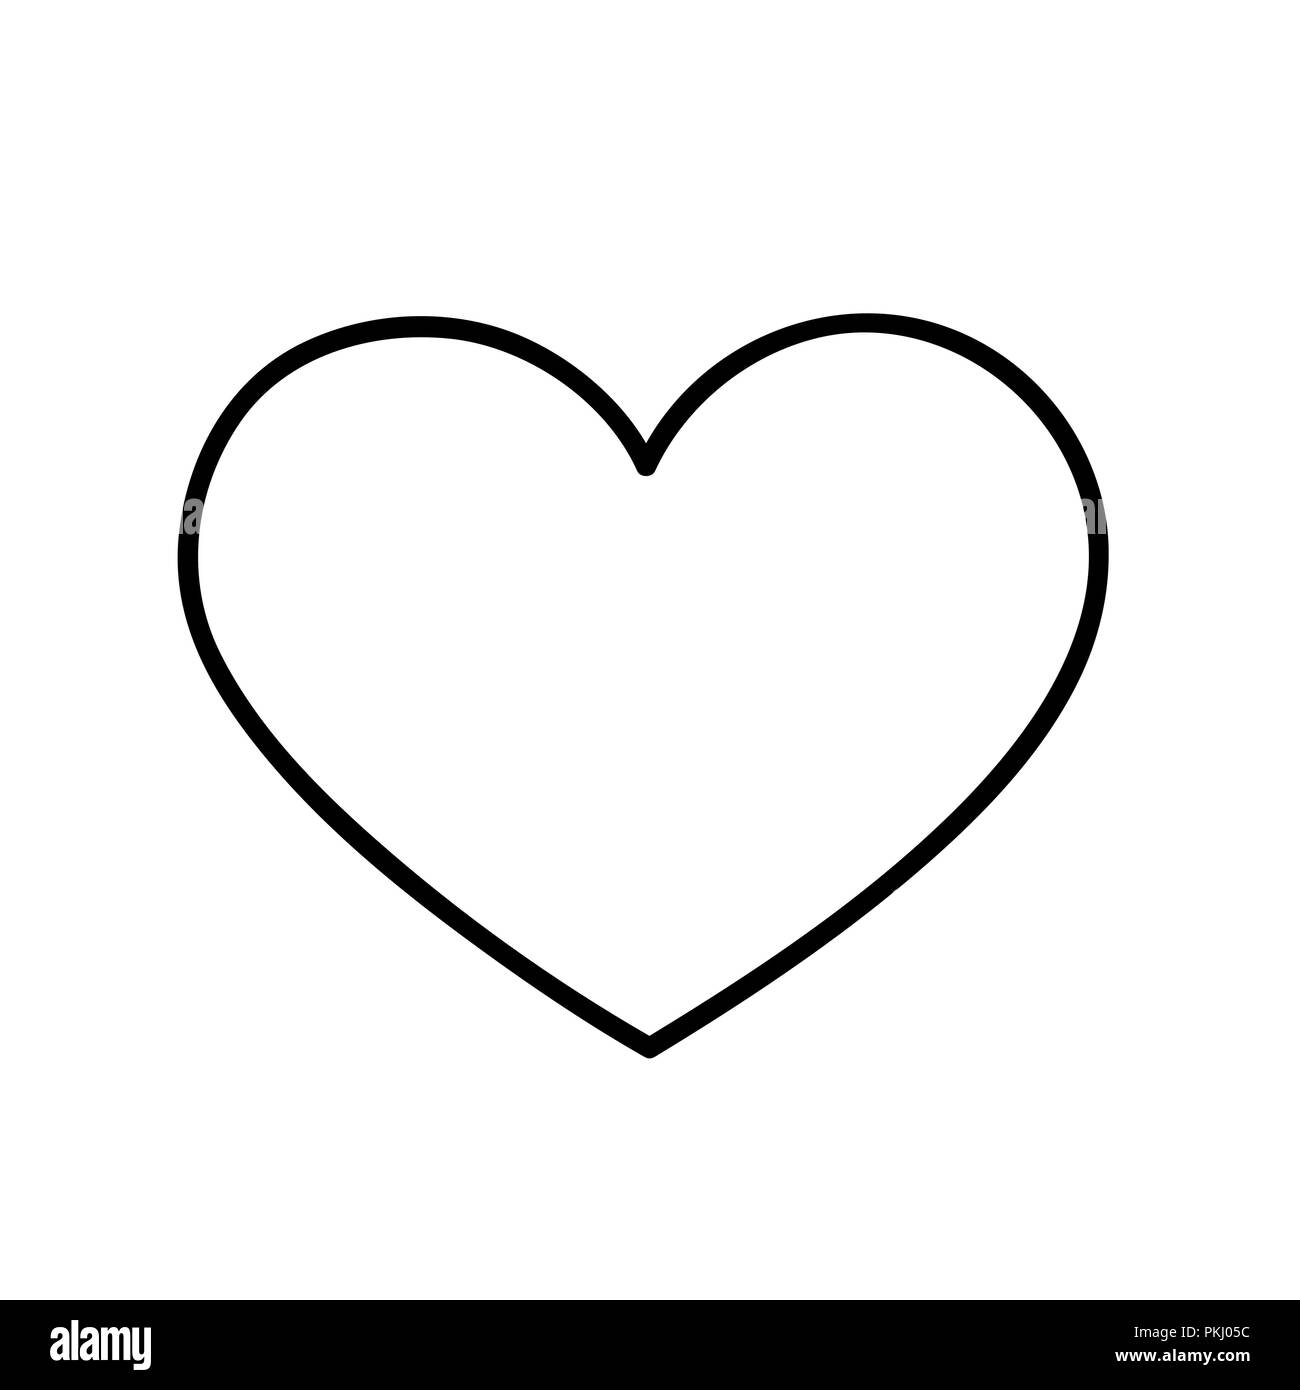 heart outline icon isolated vector illustration EPS10 Stock Vector